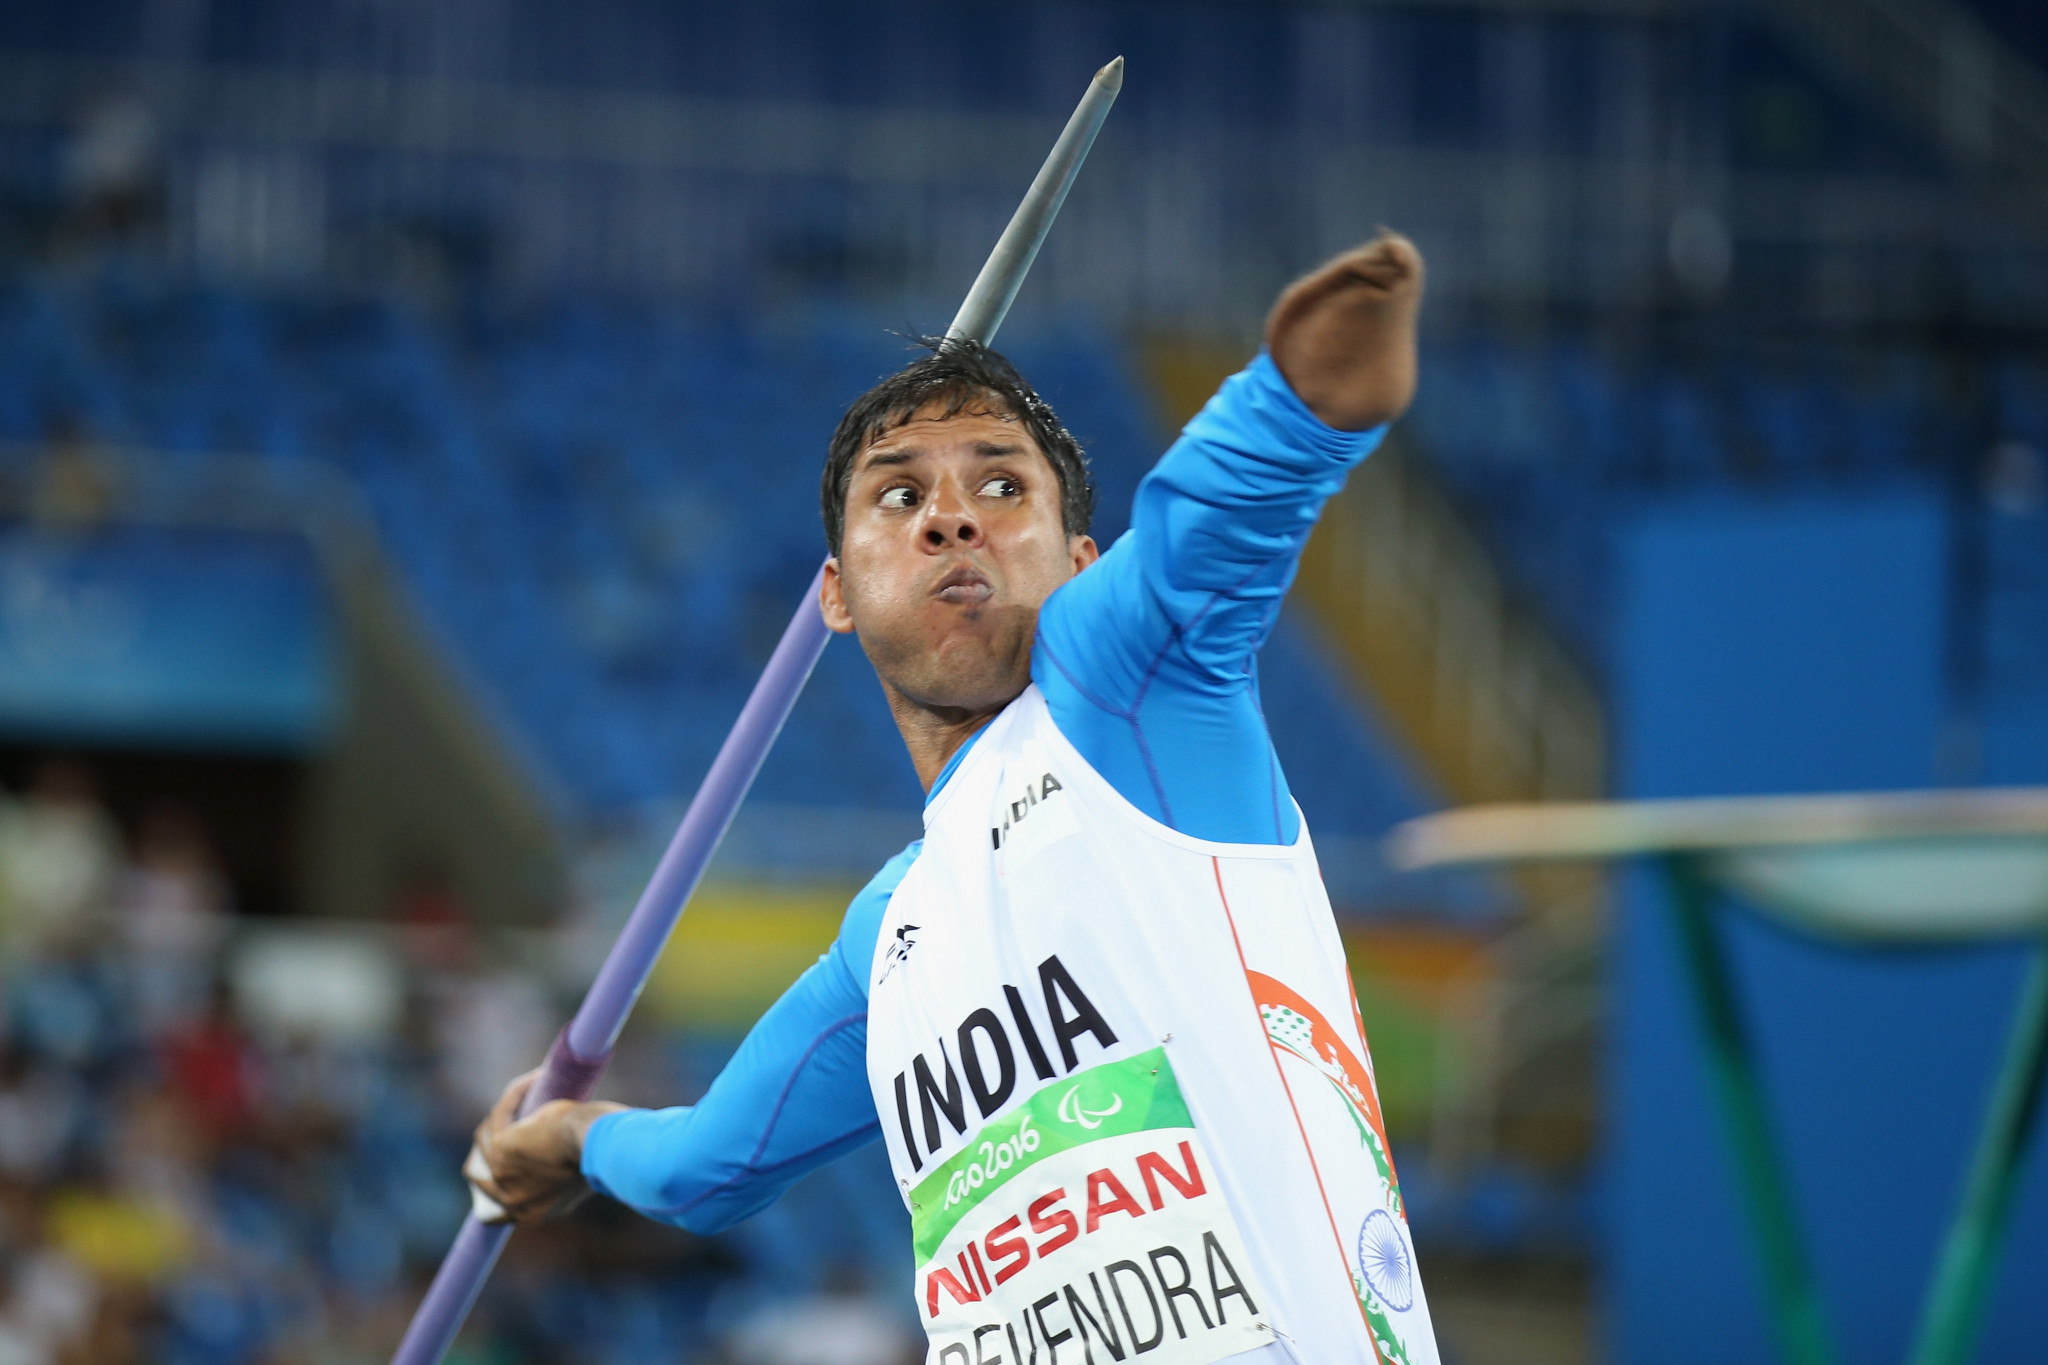 Paralympic Committee of India partners with SIDBI for Tokyo 2020 support